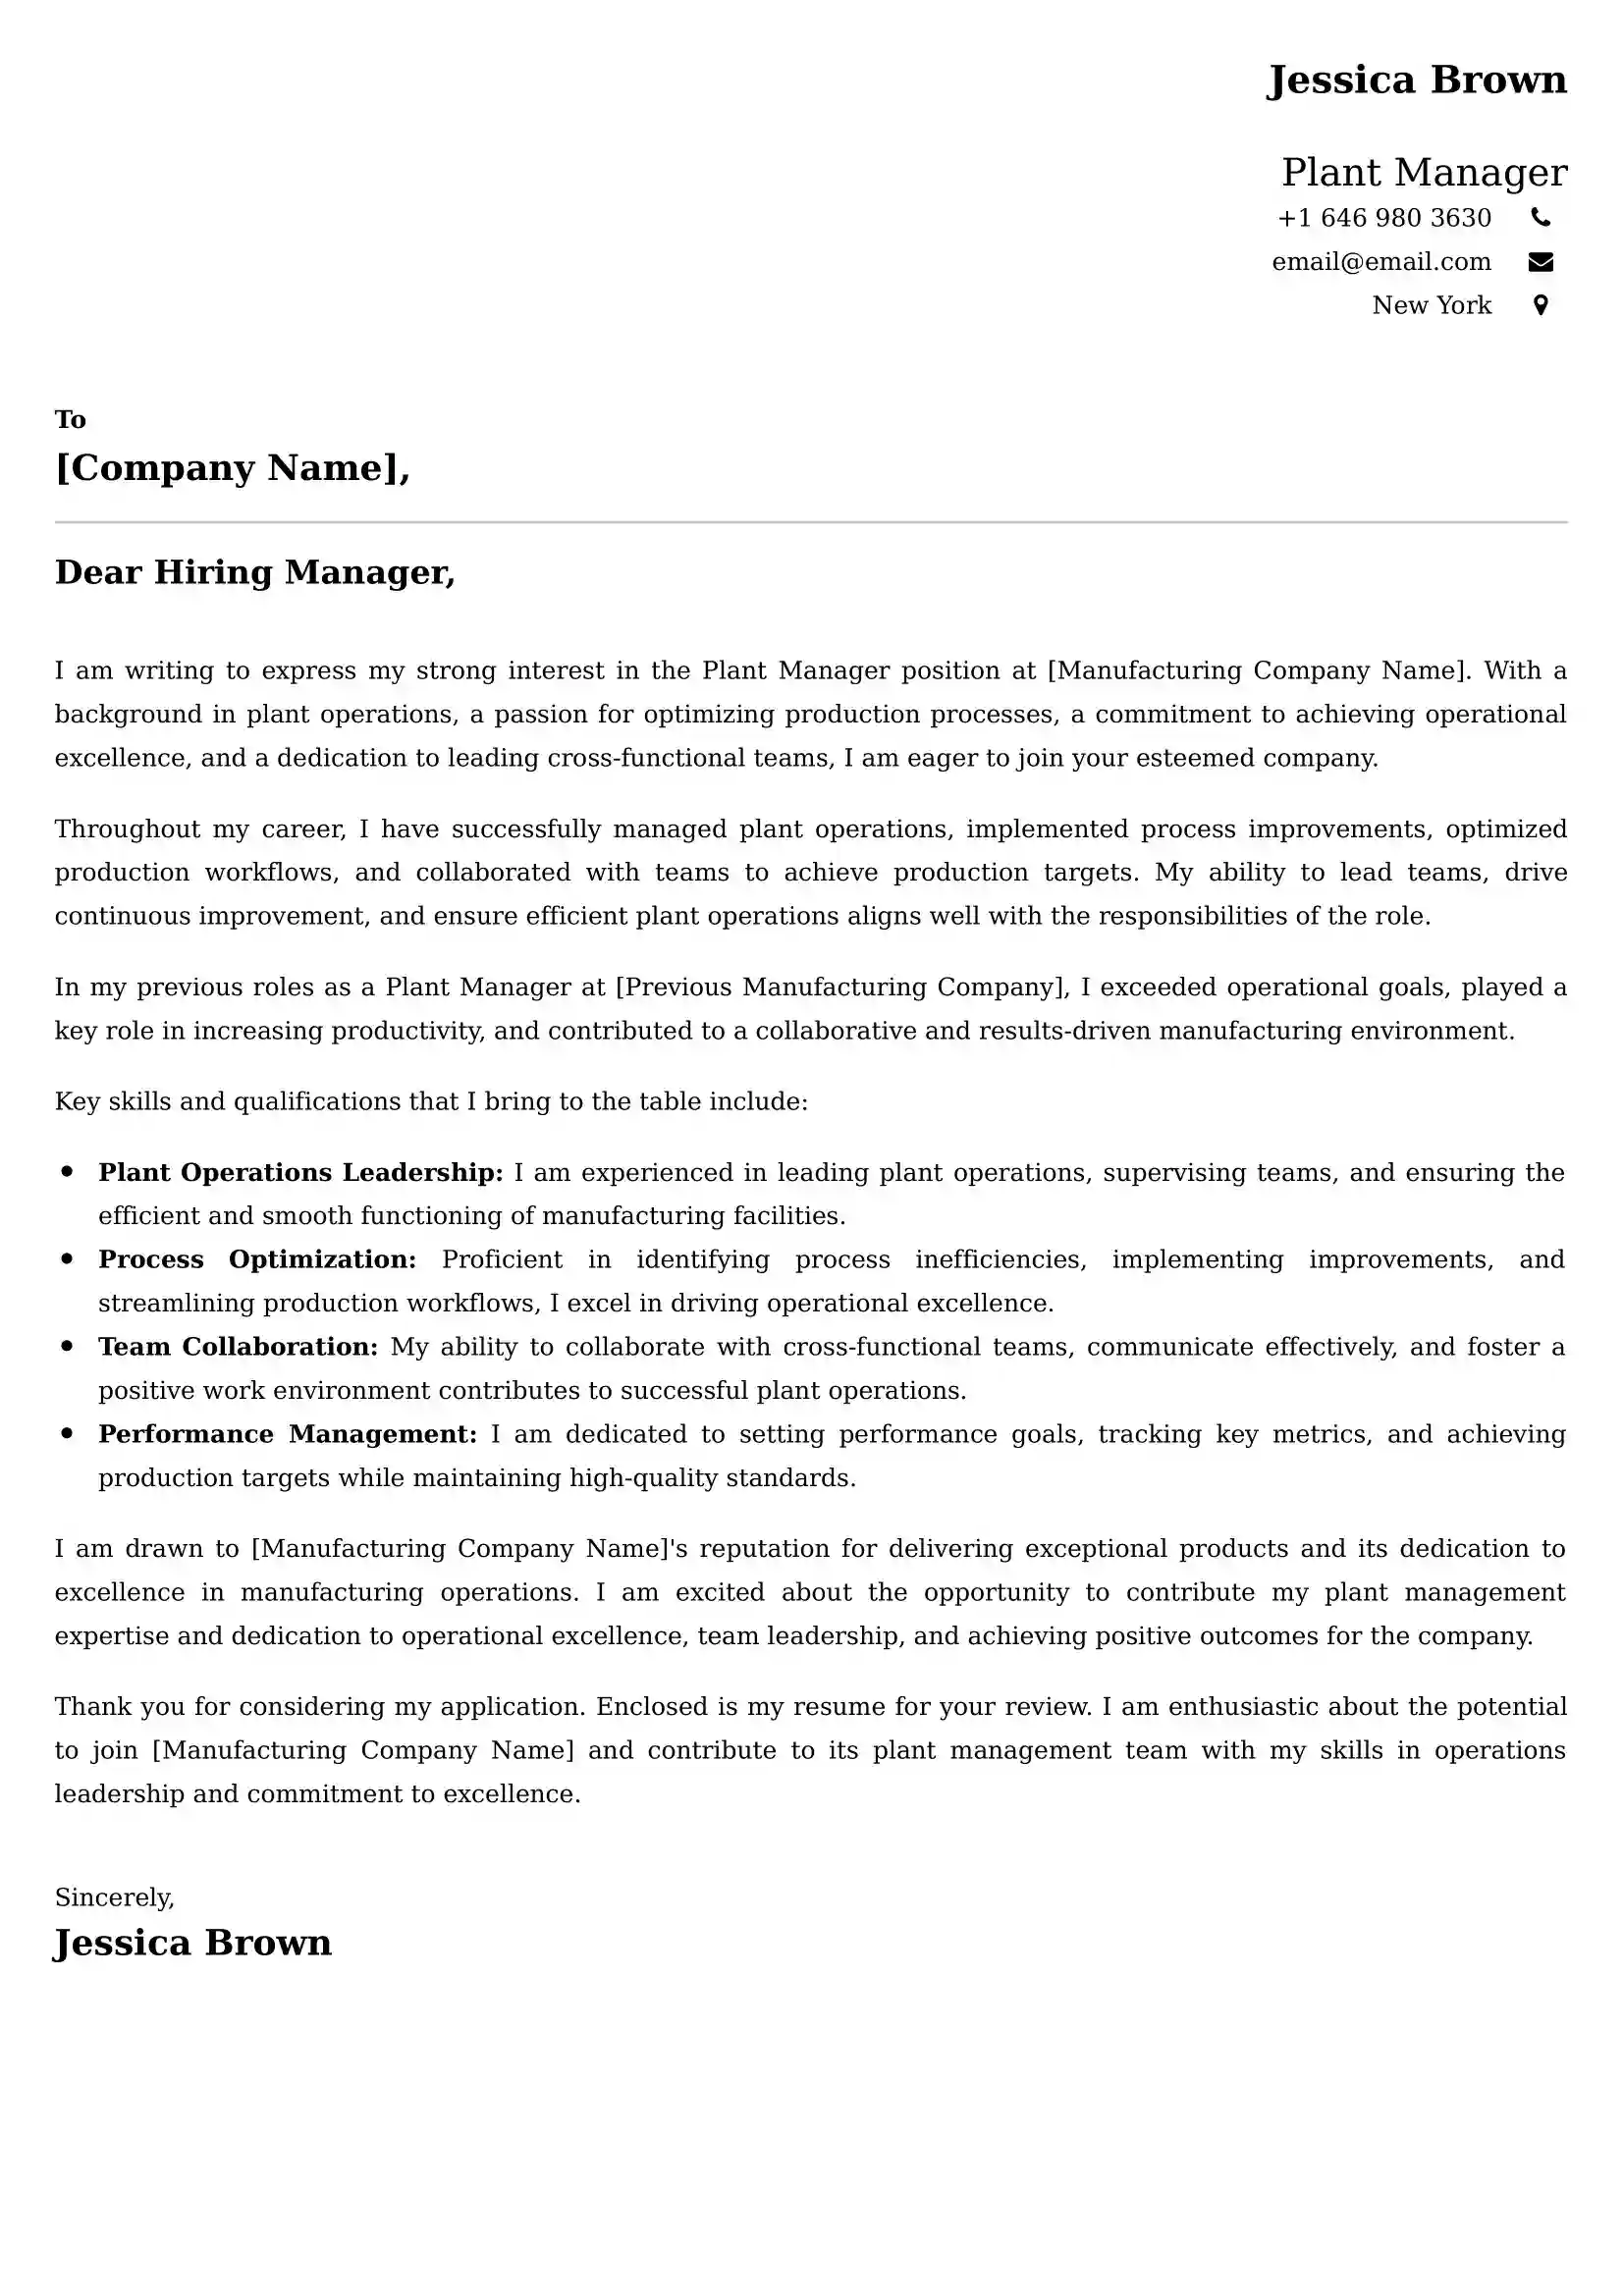 Plant Manager Cover Letter Examples - US Format and Tips